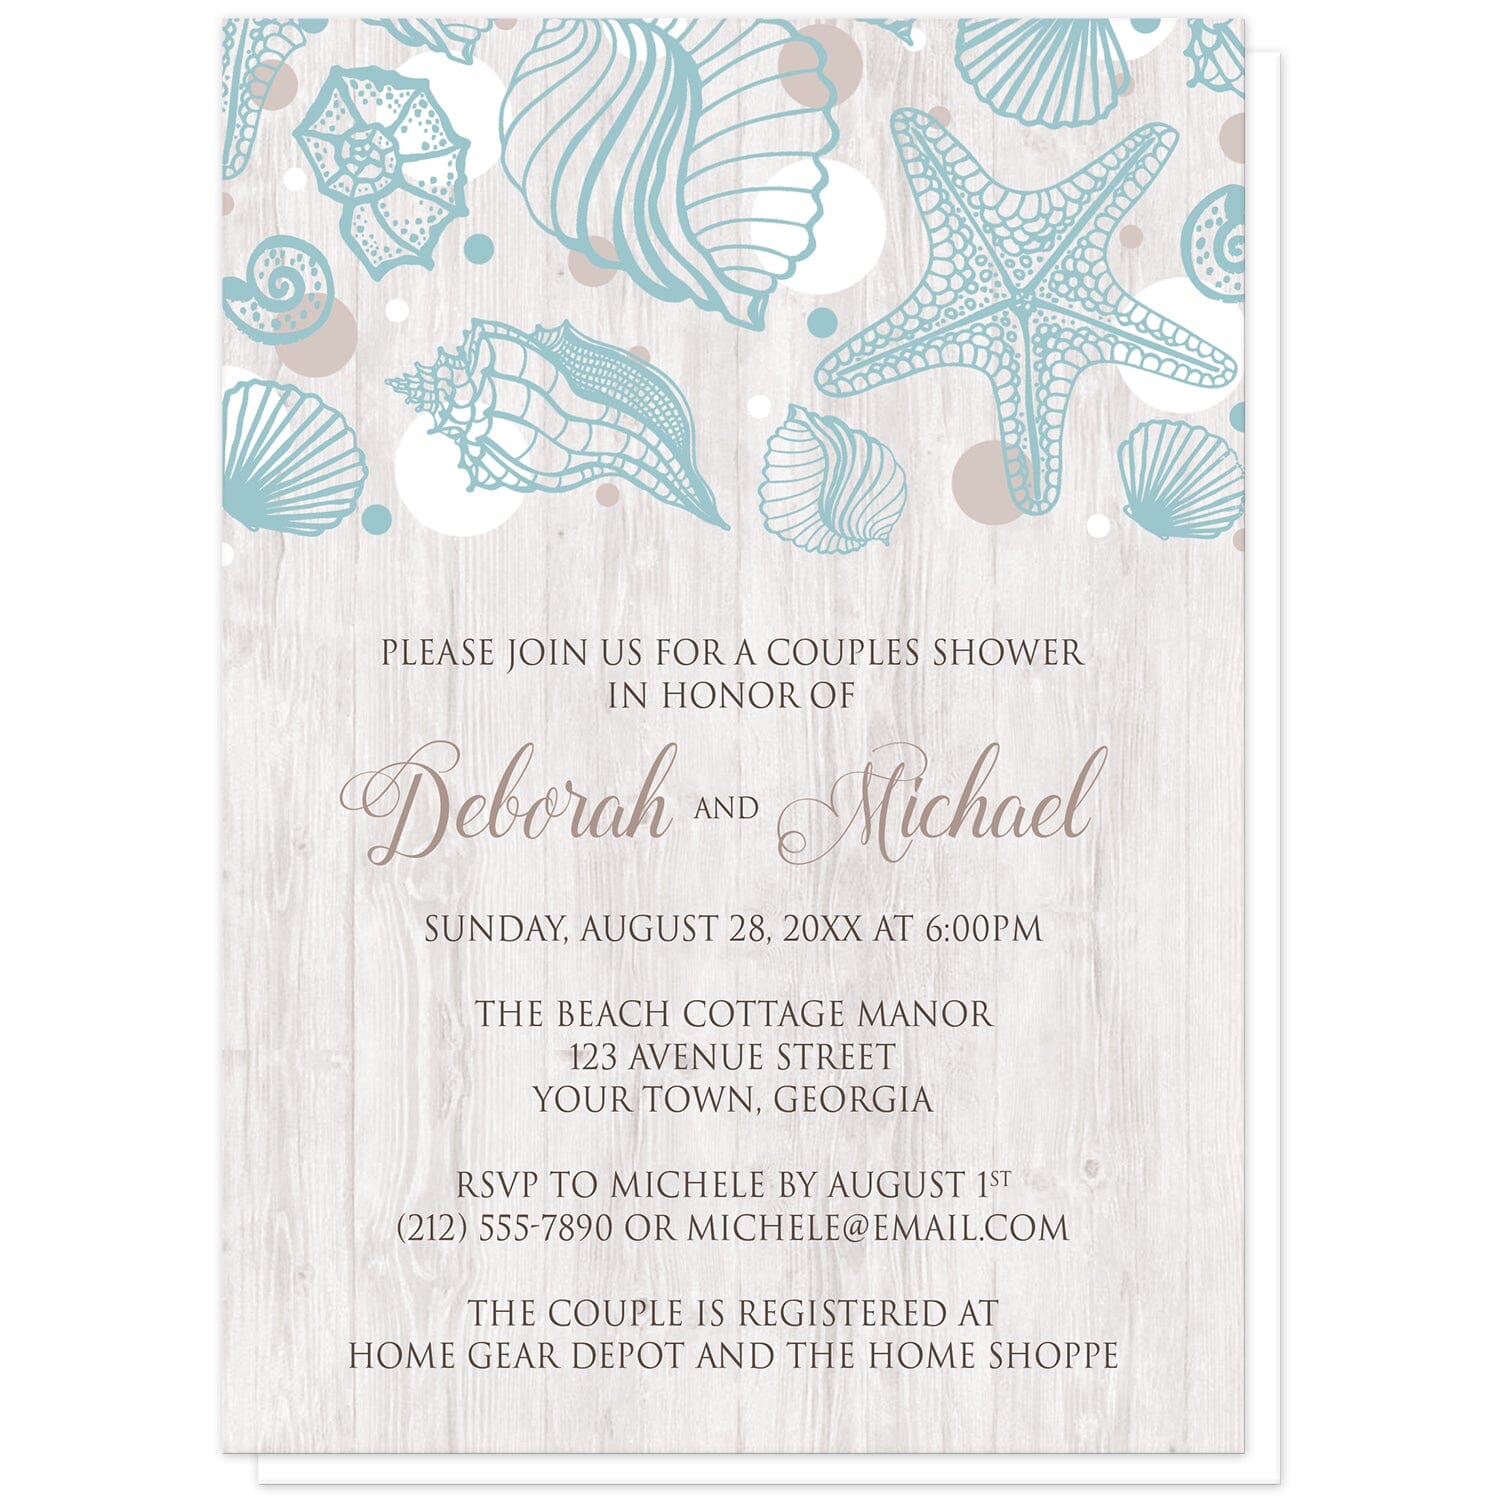 Seashell Whitewashed Wood Beach Couples Shower Invitations at Artistically Invited. Rustic-chic seashell whitewashed wood beach couples shower invitations with a turquoise seashell line drawing with accent tan and white dots over a light whitewashed wood illustration. Your personalized couples shower celebration details are custom printed in tan and brown over the whitewashed wood background below the seashells.